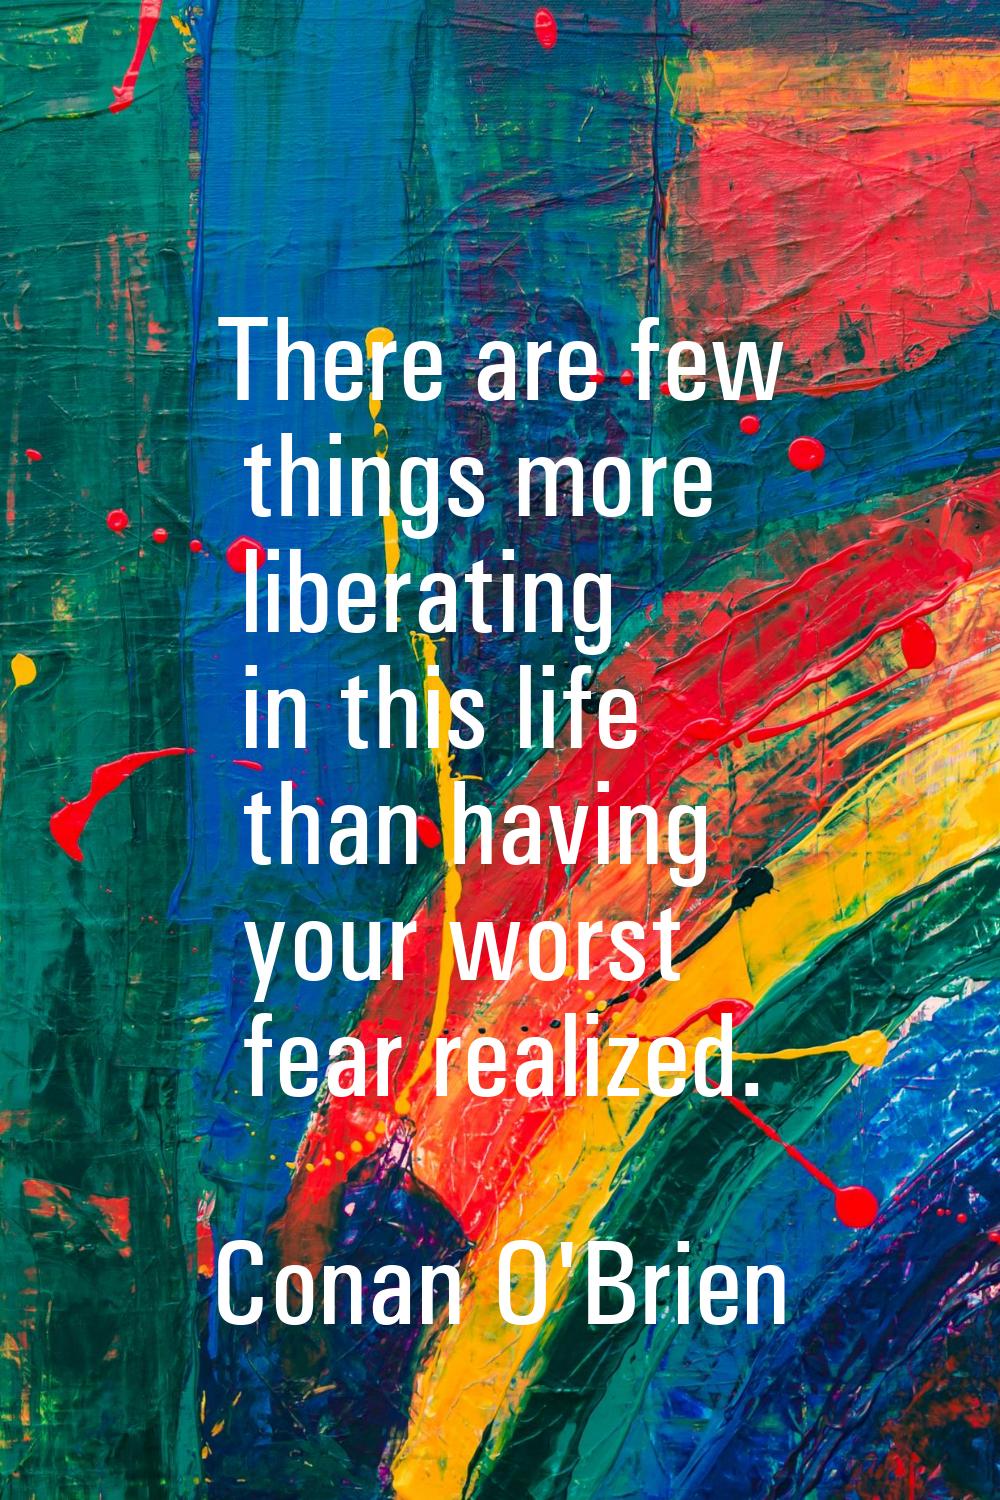 There are few things more liberating in this life than having your worst fear realized.